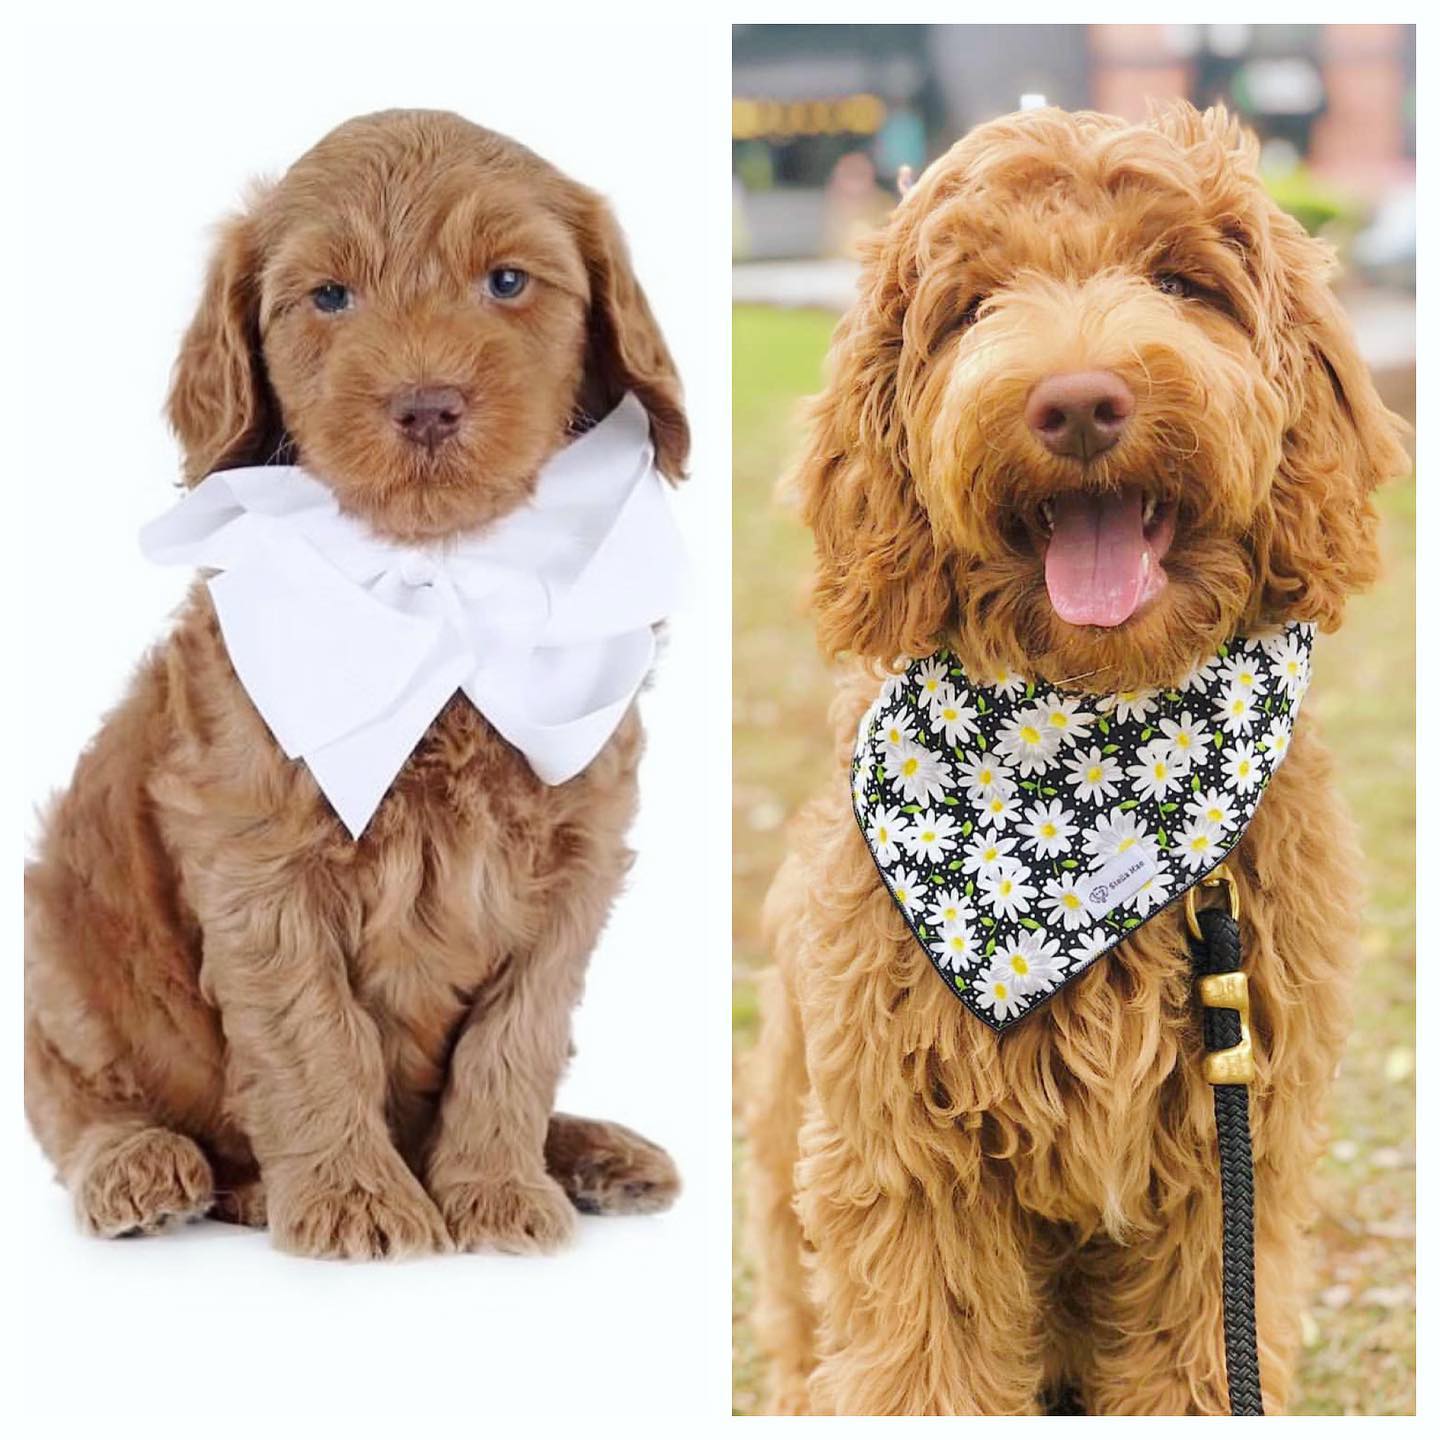 The Goldendoodle is a breed of dog that is a mix between a Golden Retriever and a Poodle. As a puppy, they are adorable with their soft fur and big eyes. As they grow into adulthood, they maintain their cute features while also becoming more developed and confident.